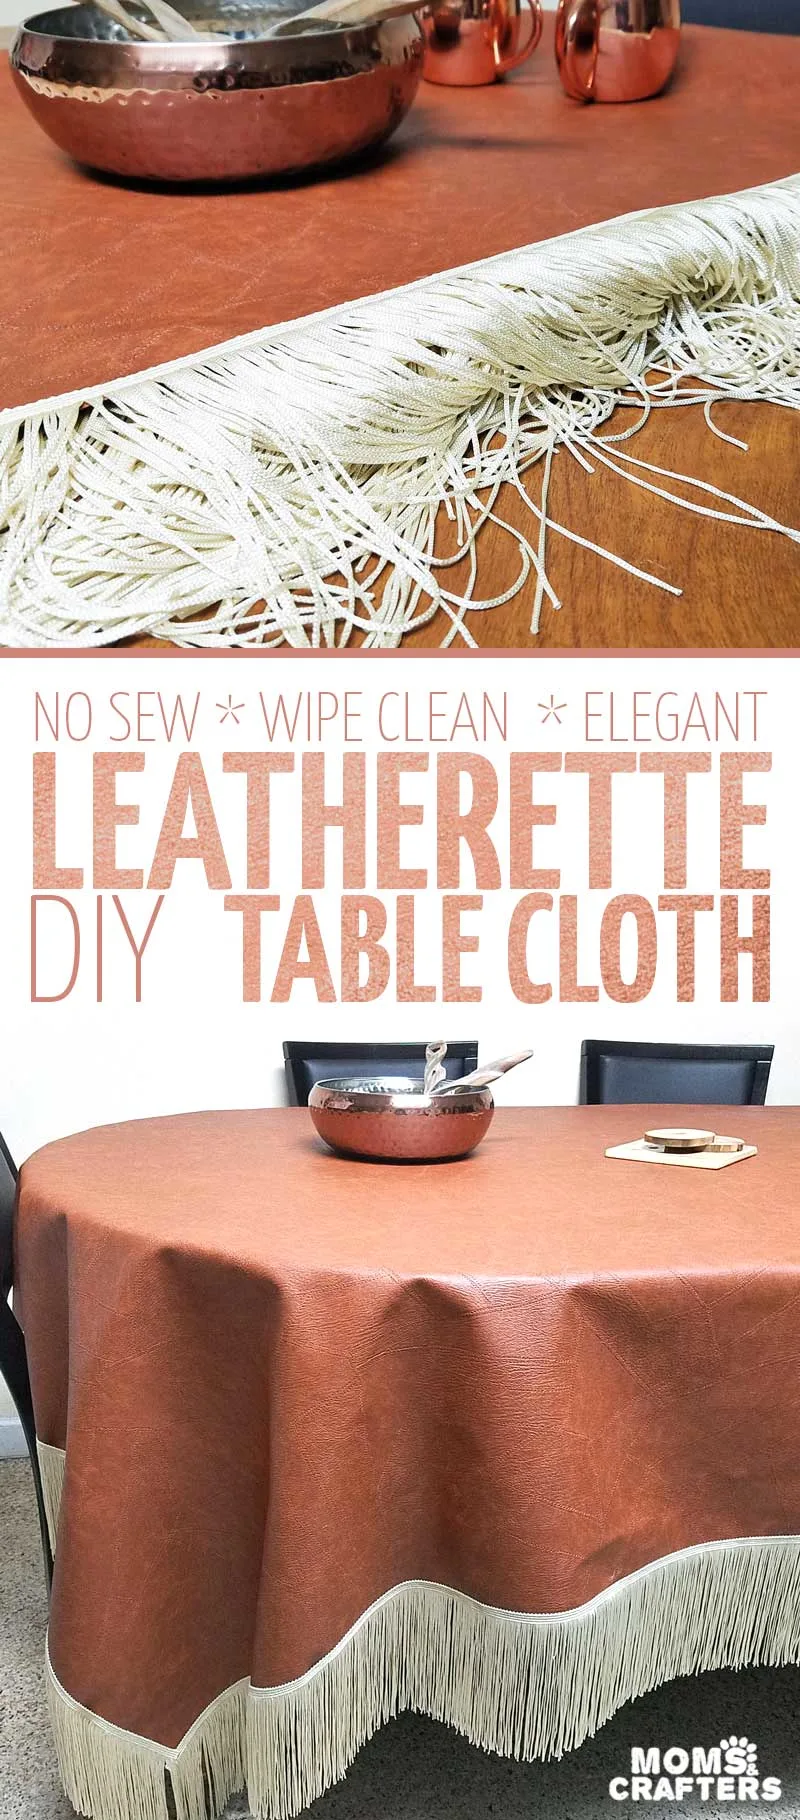 A faux leather table cloth - how brilliant is that?! Make this super easy no sew DIY leatherette tablecloth so your kids don't mess up your good one. It doesn't look tacky like other vinyl table covers, and is a brilliant holiday tablescape idea or kid-friendly decor!